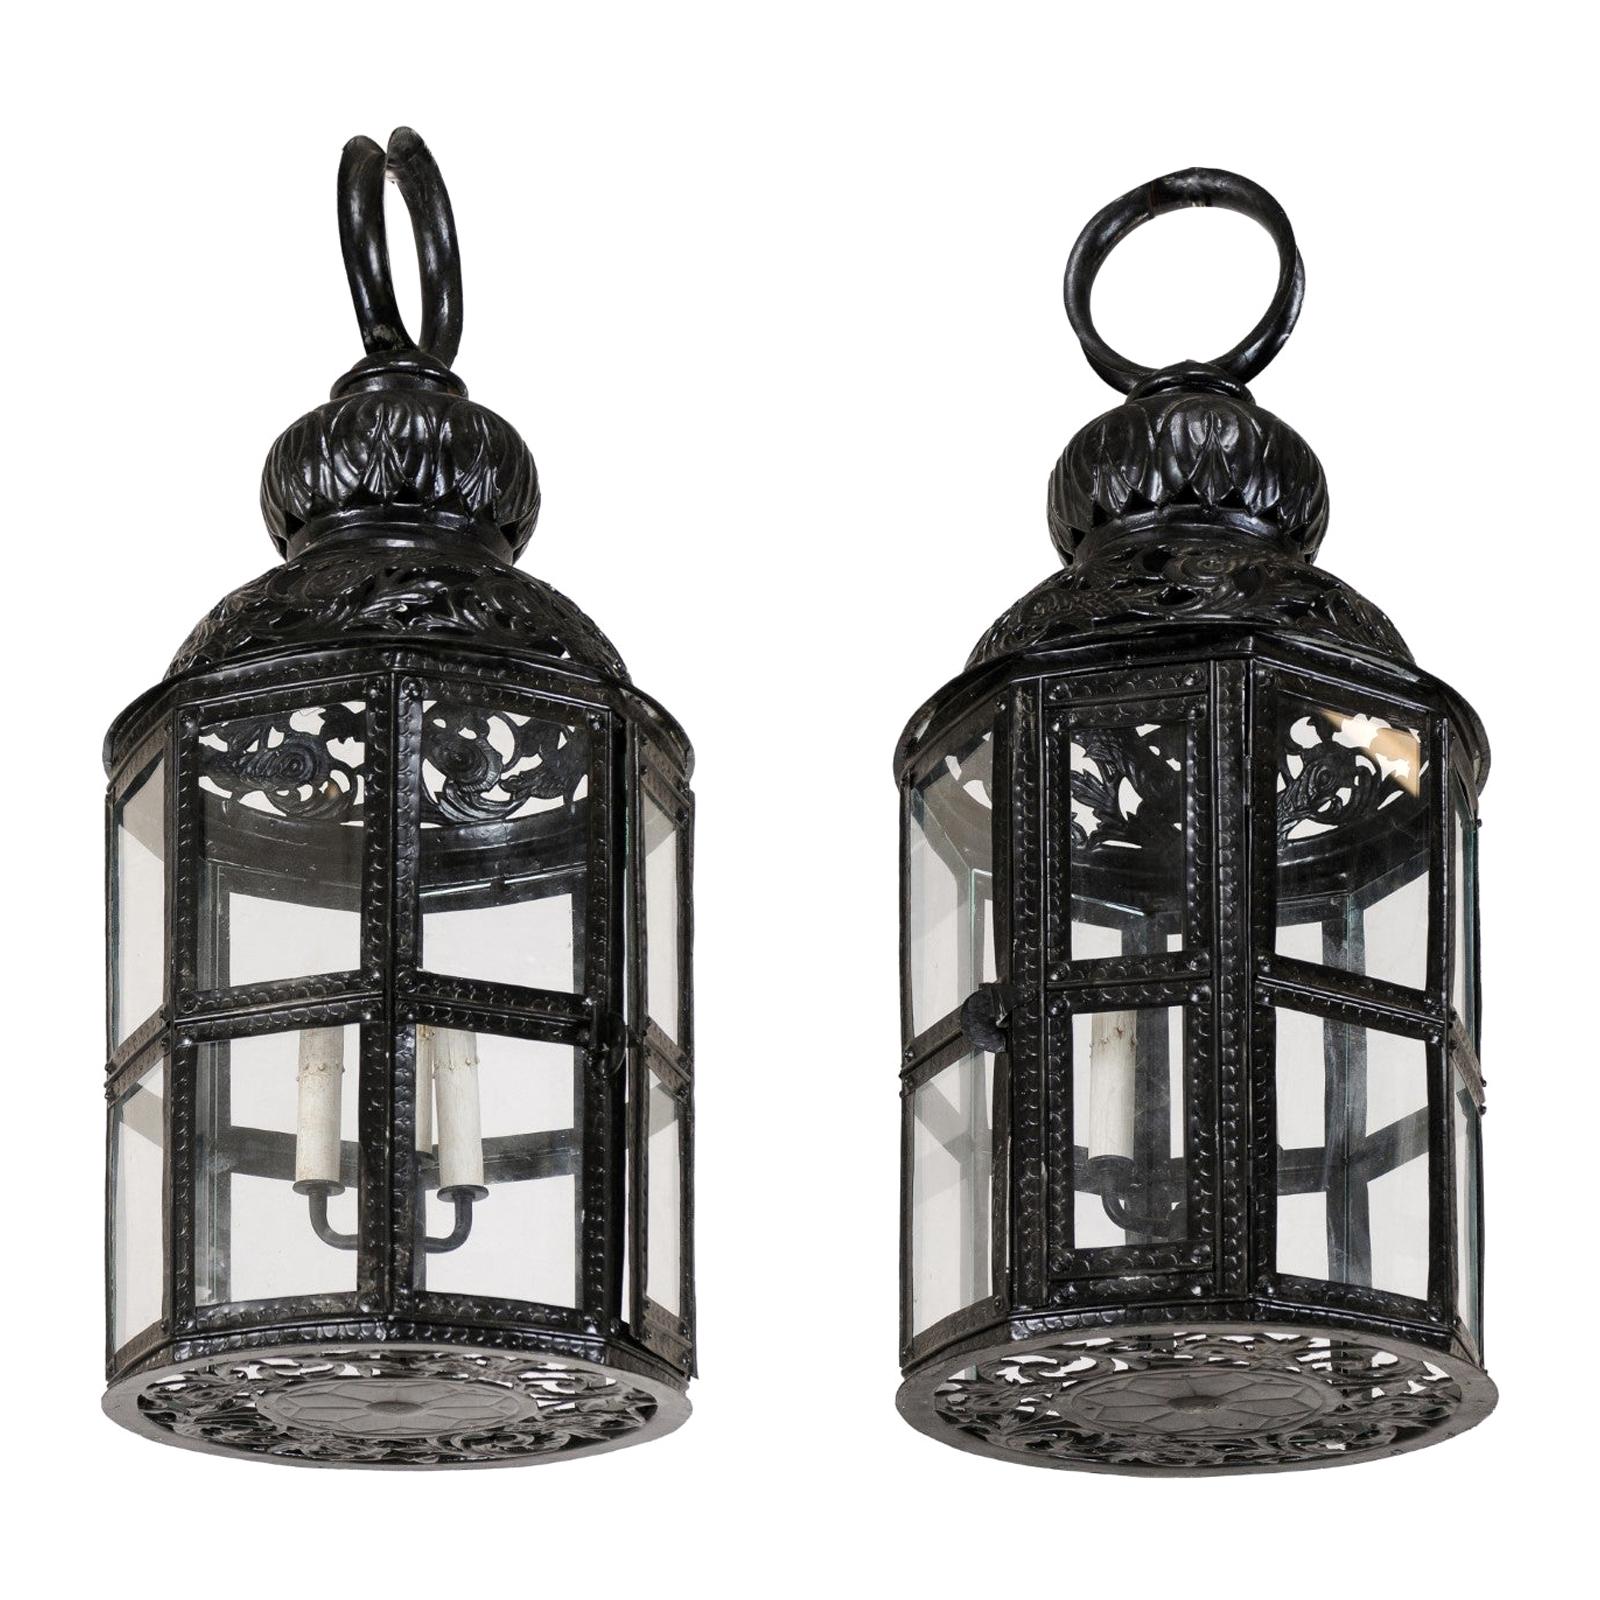 Pair of Three-Light Moroccan-Inspired European Lanterns in Black Color w/Glass For Sale